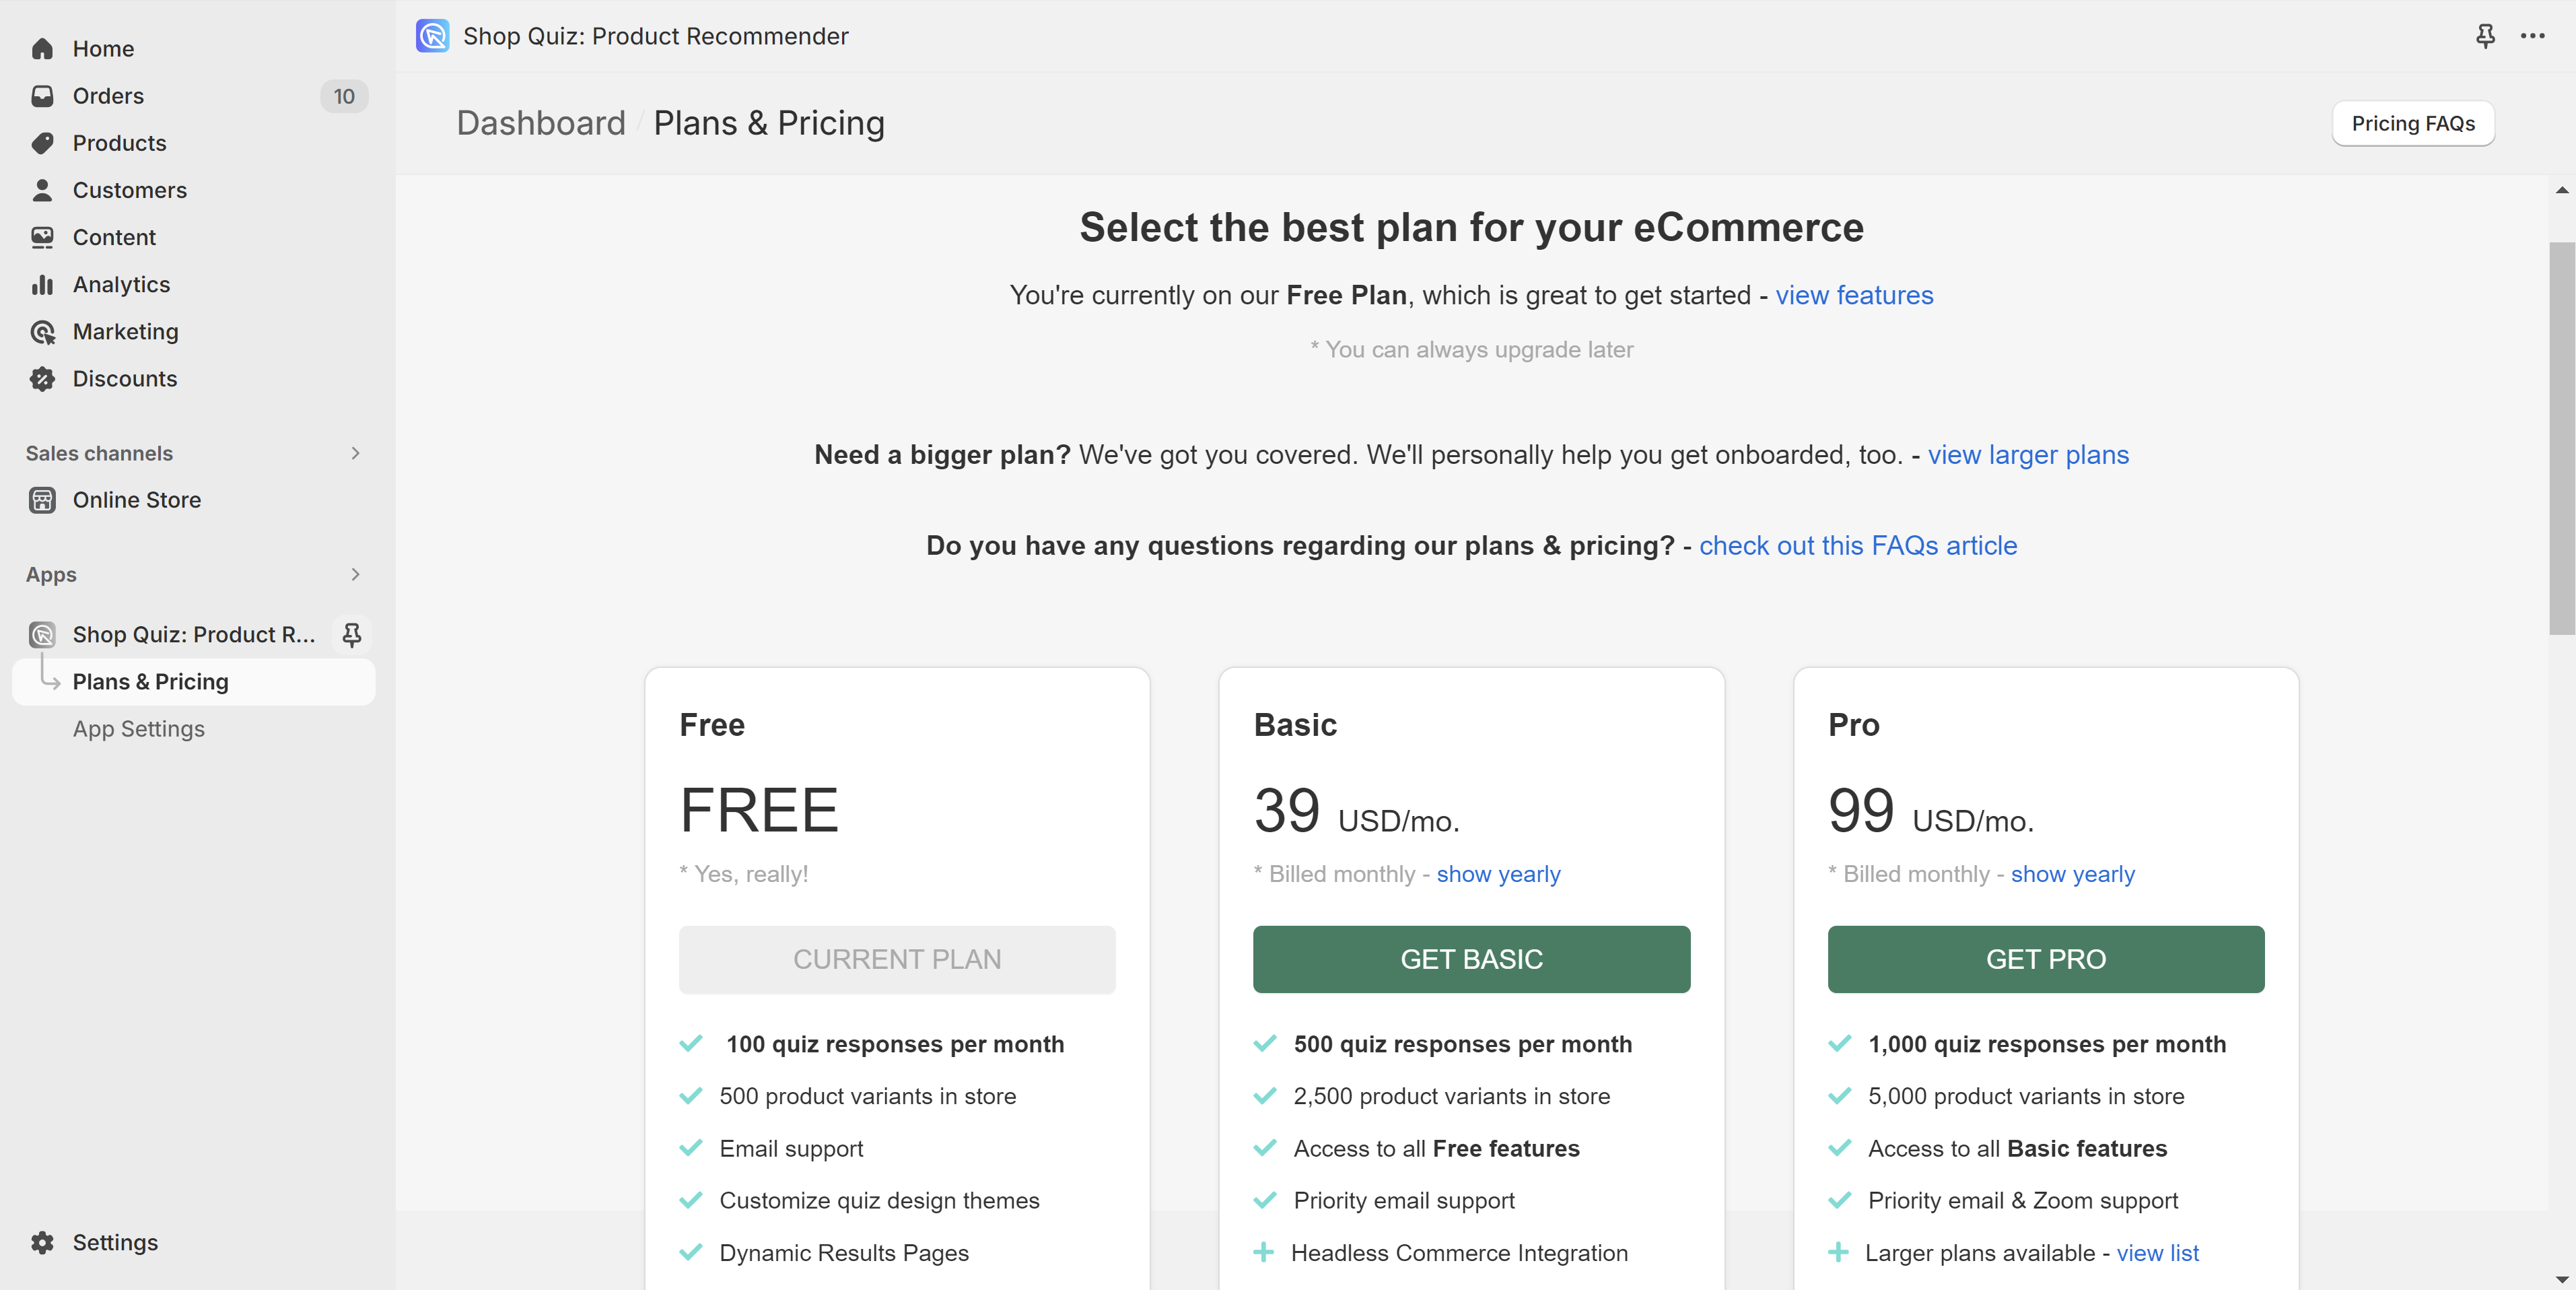 plans & pricing page